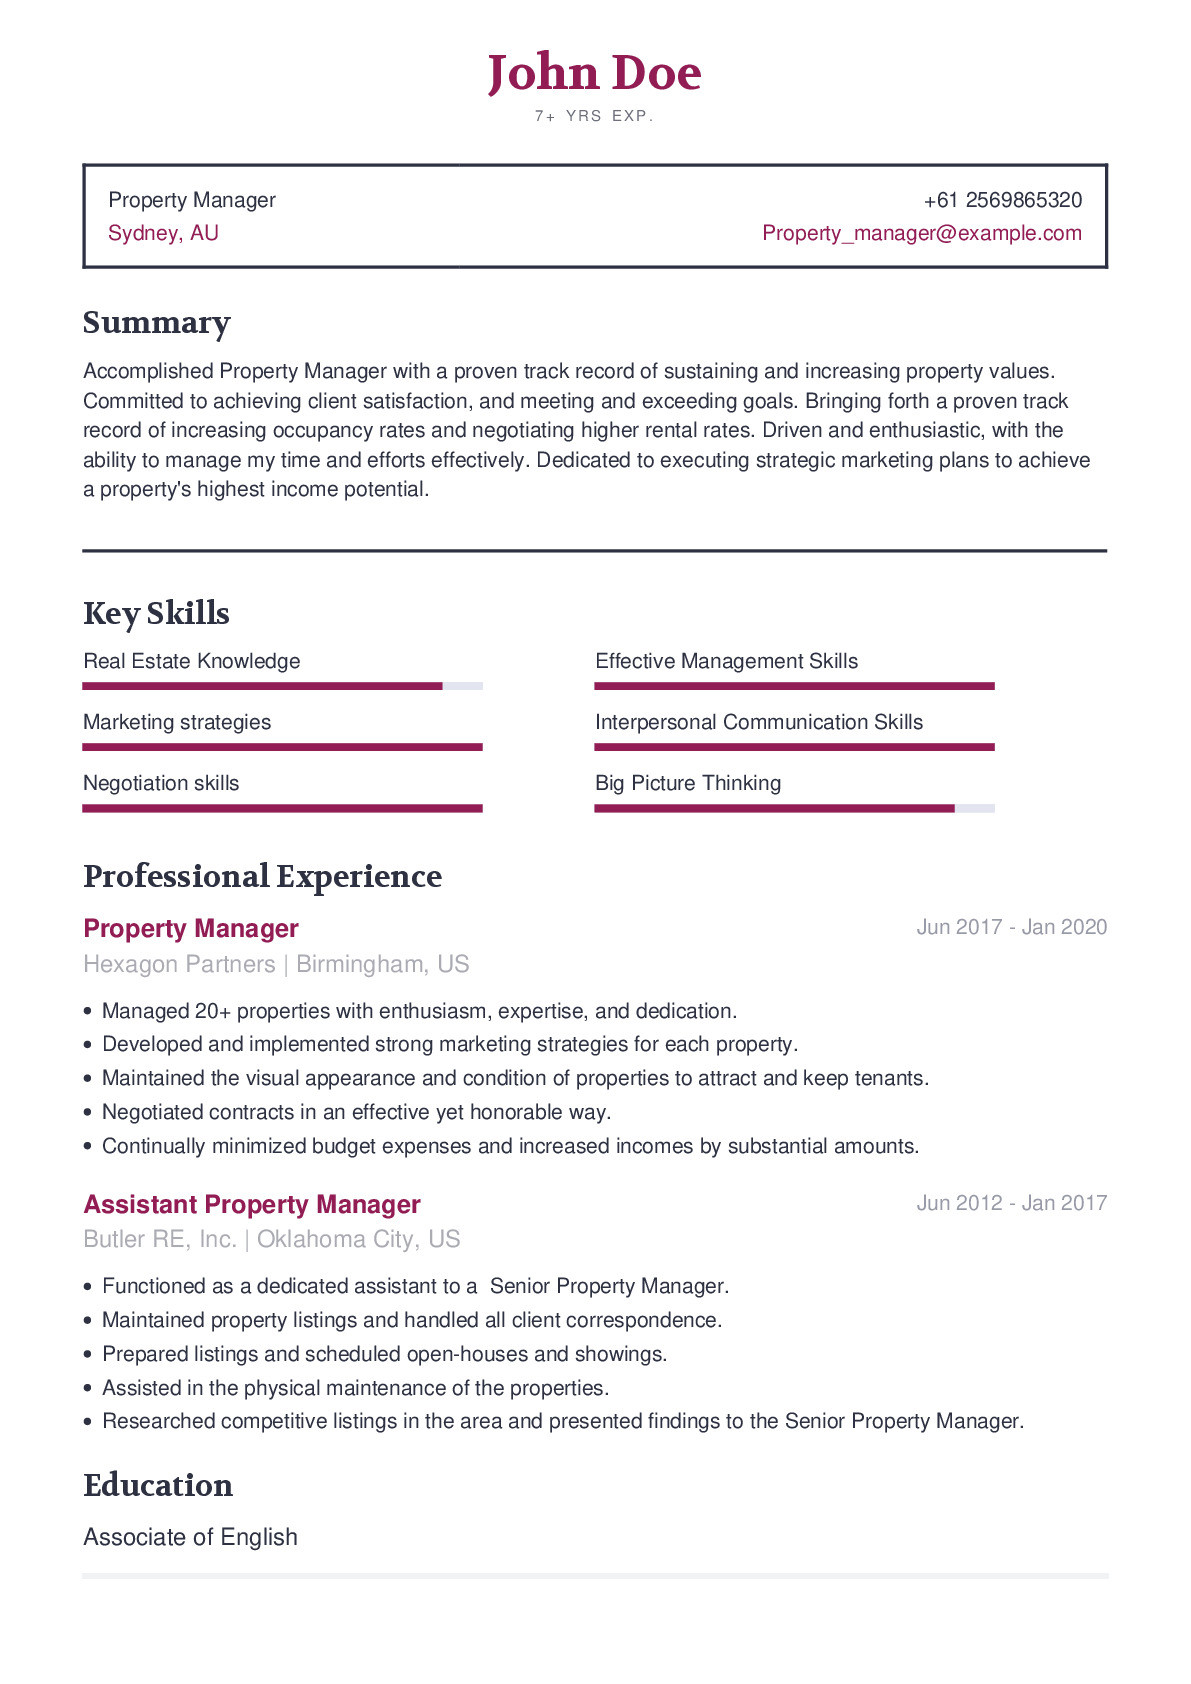 Sample Resume for Residential Property Manager Property Manager Resume Example with Content Sample Craftmycv